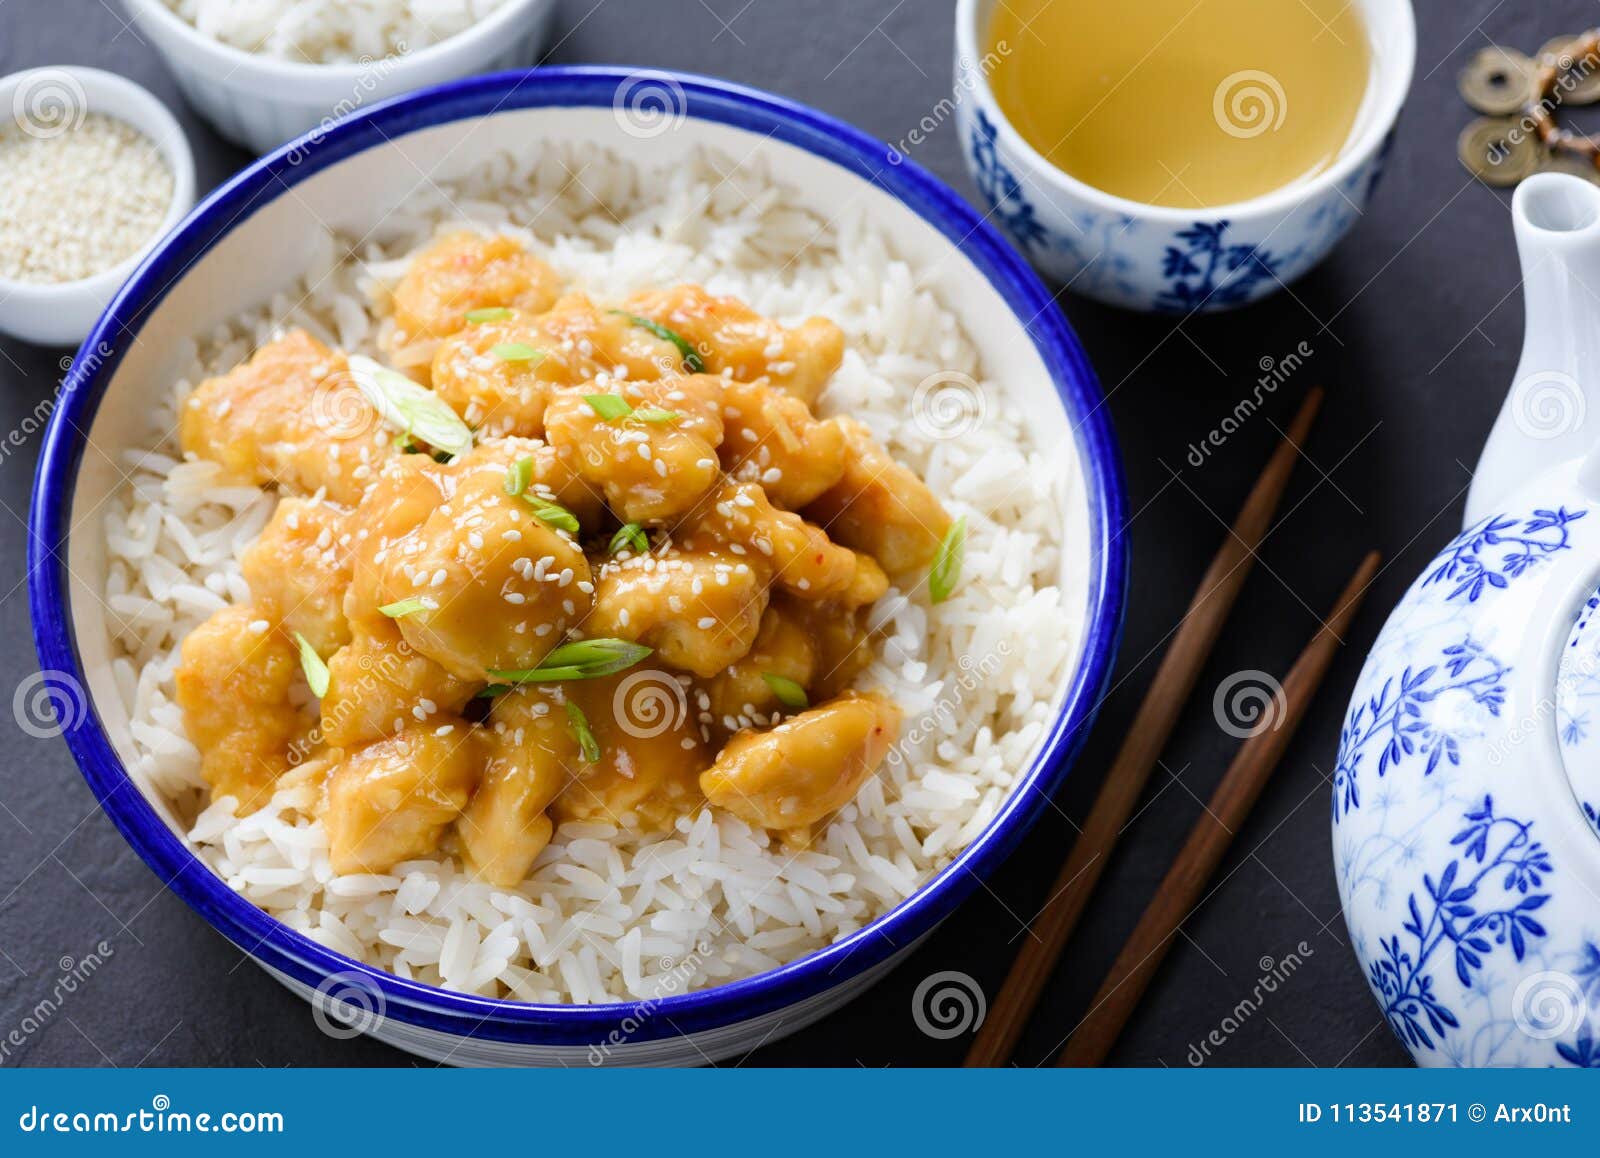 Teriyaki Chicken with Rice and Green Tea in China Tea Pot Stock Image ...